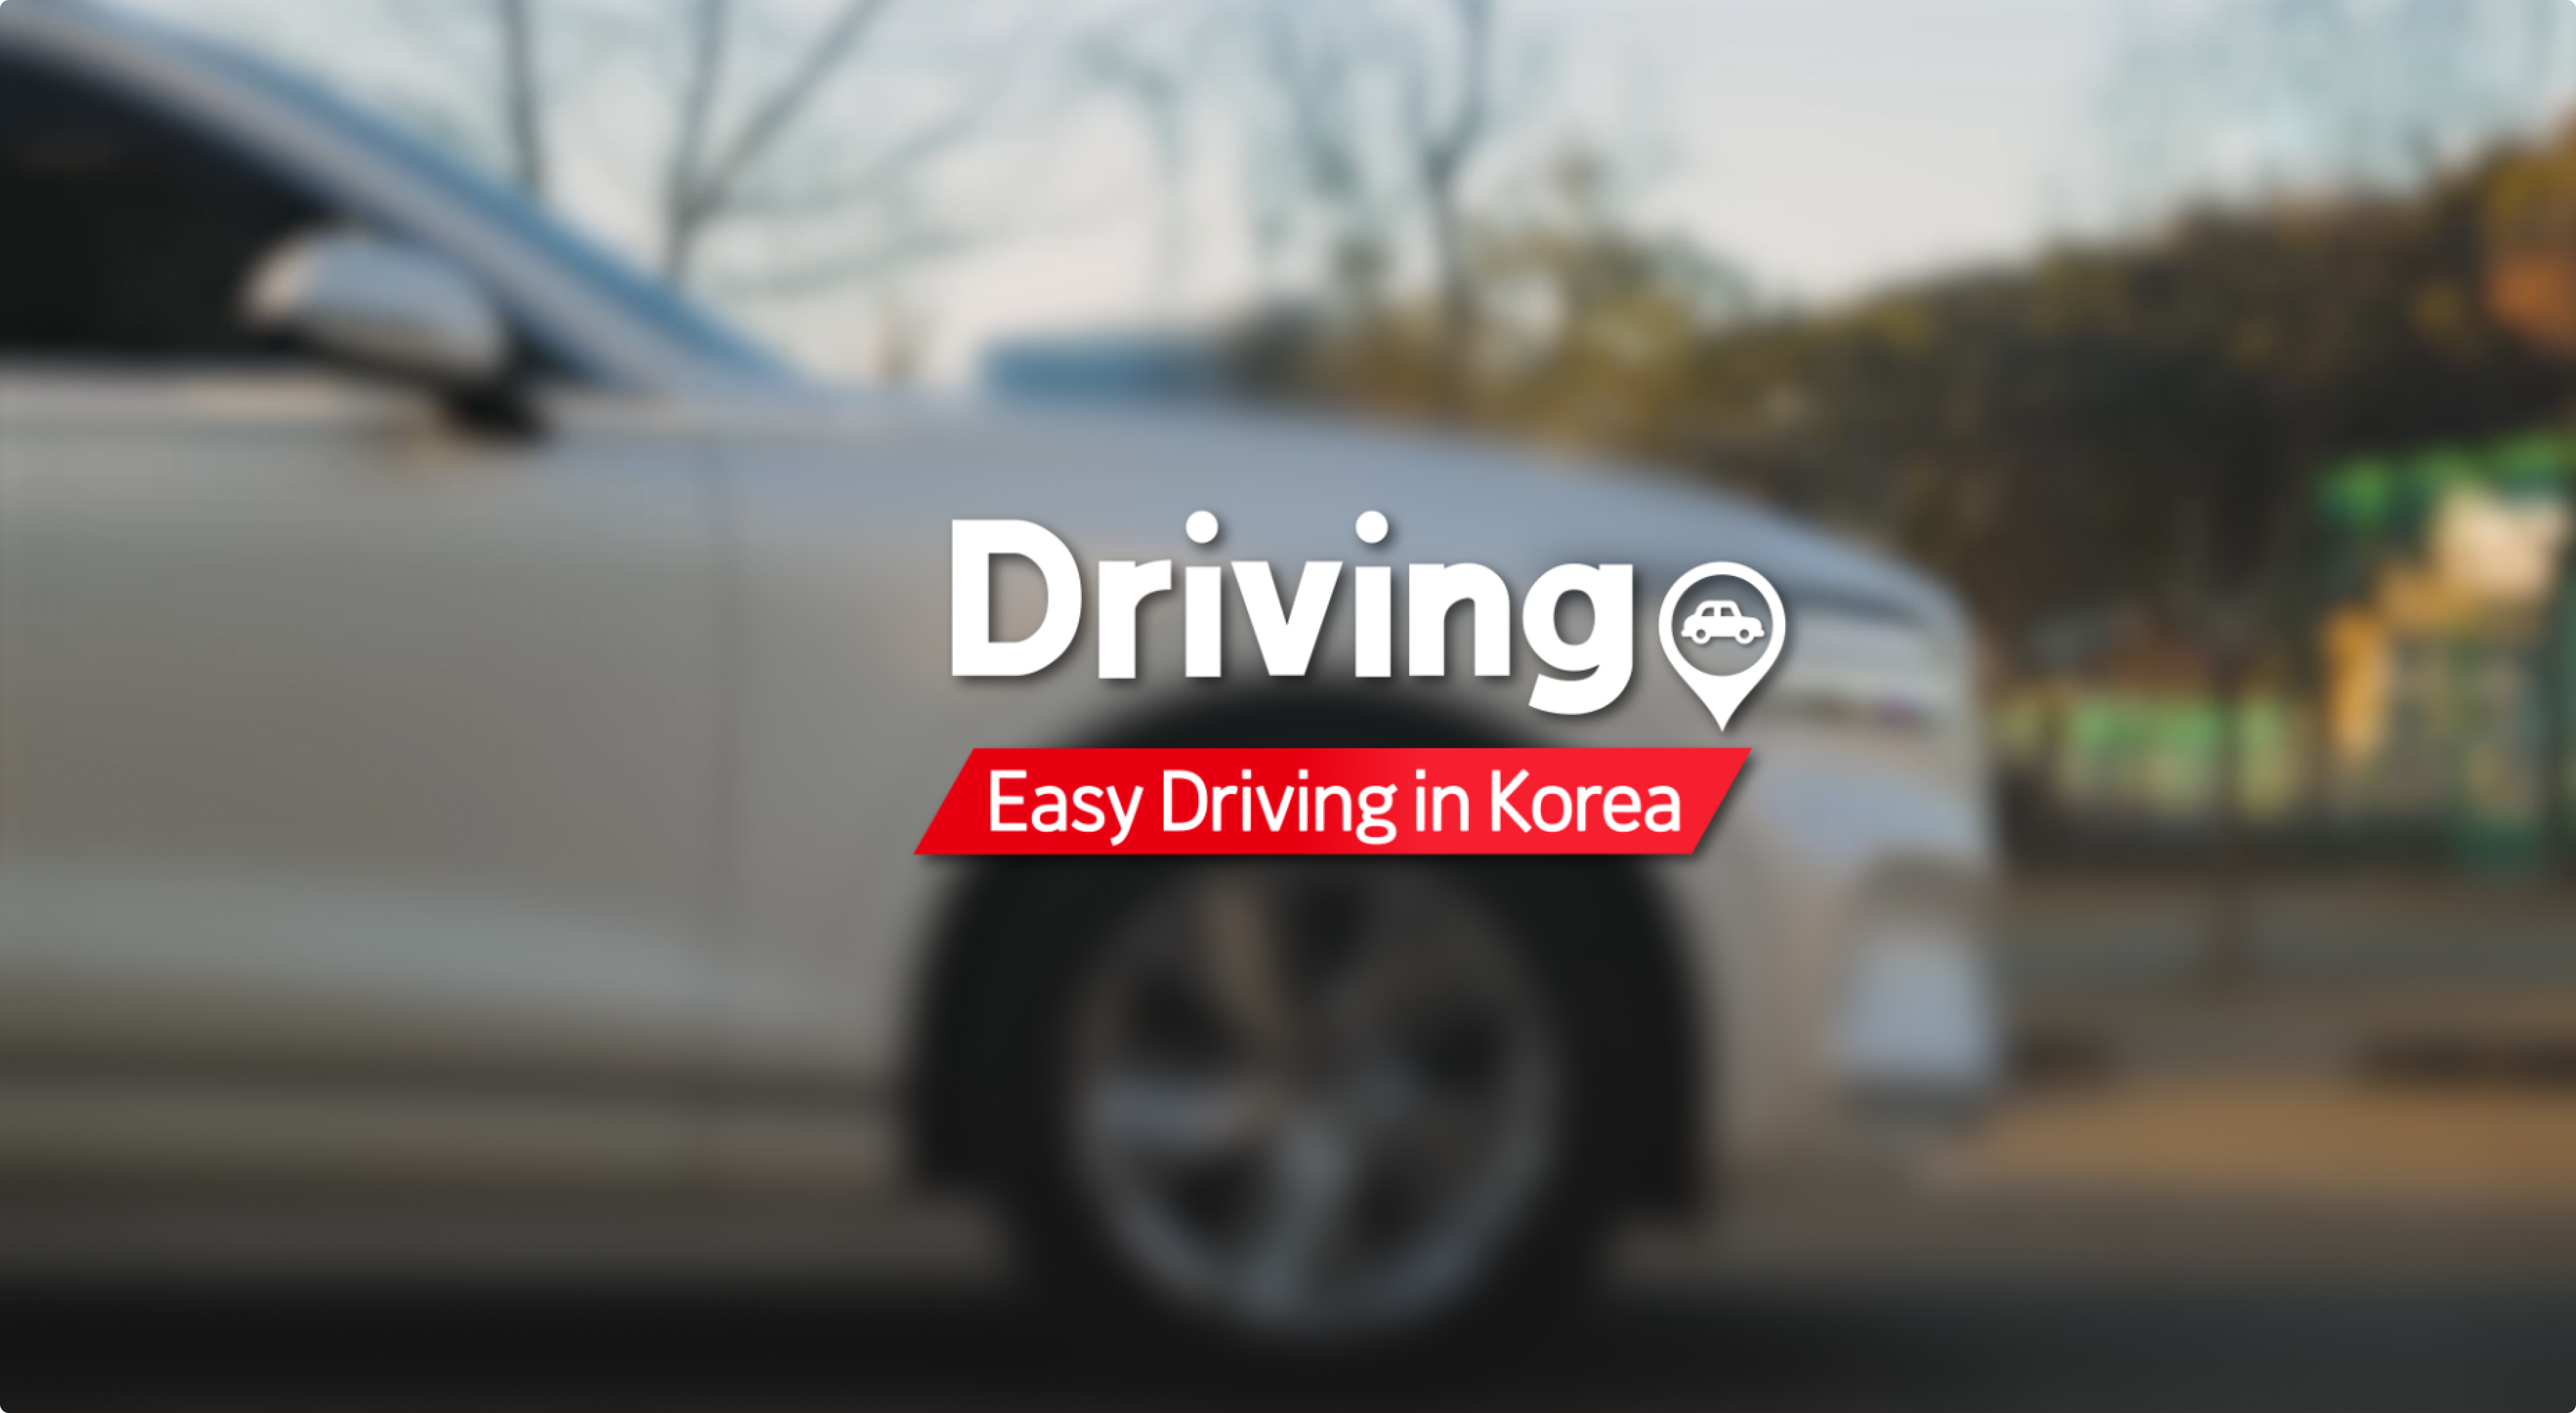 5 Tips for Drivers in Korea